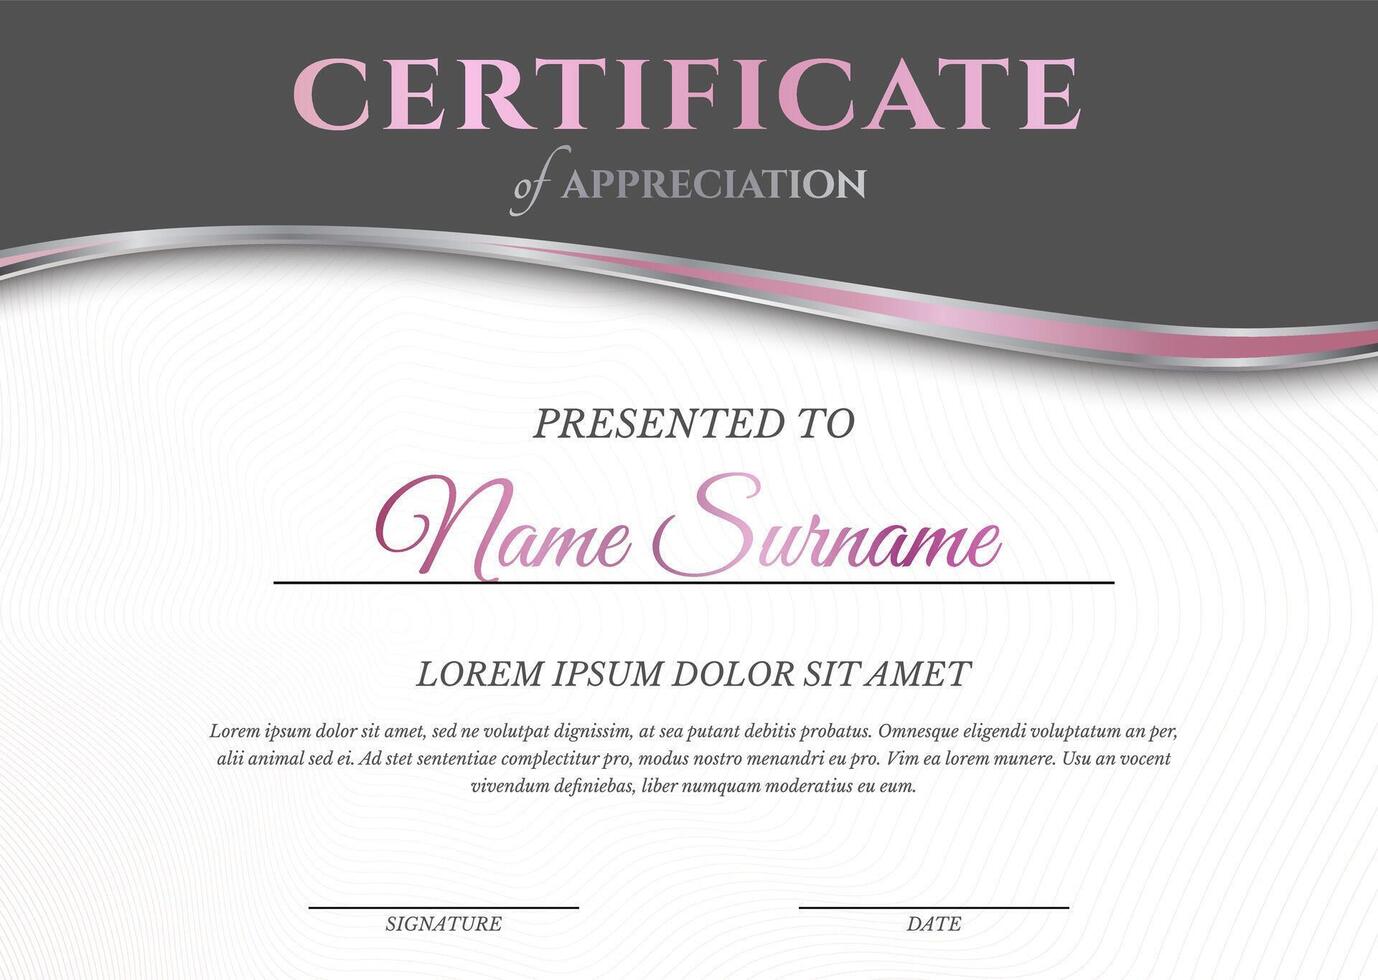 Feminine Pink and White Light Certificate Diploma Template for Woman vector